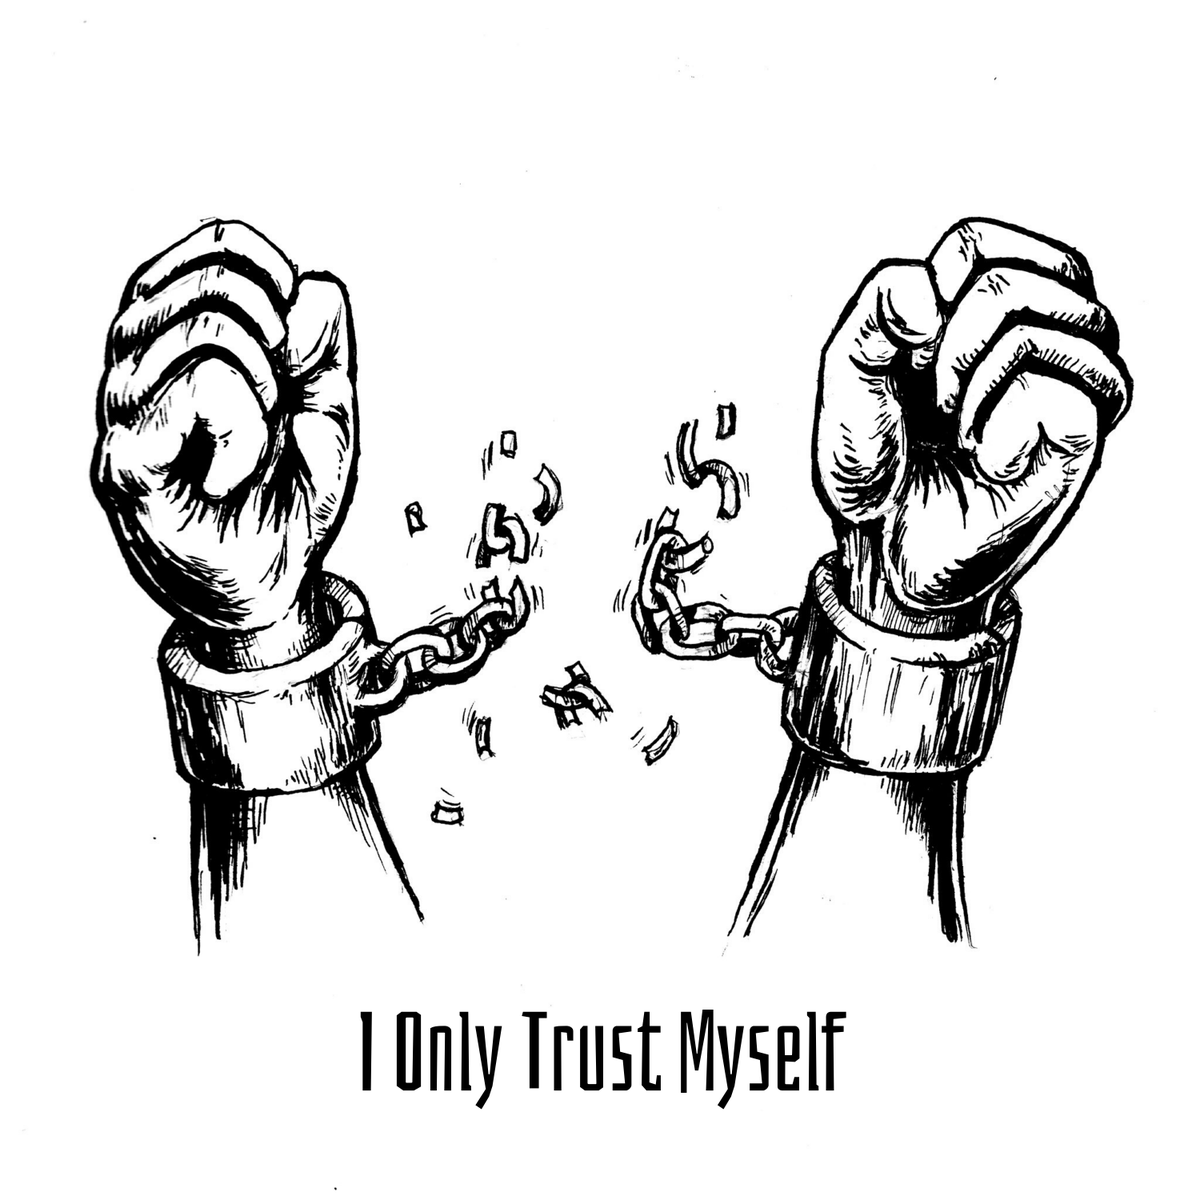 Only trust